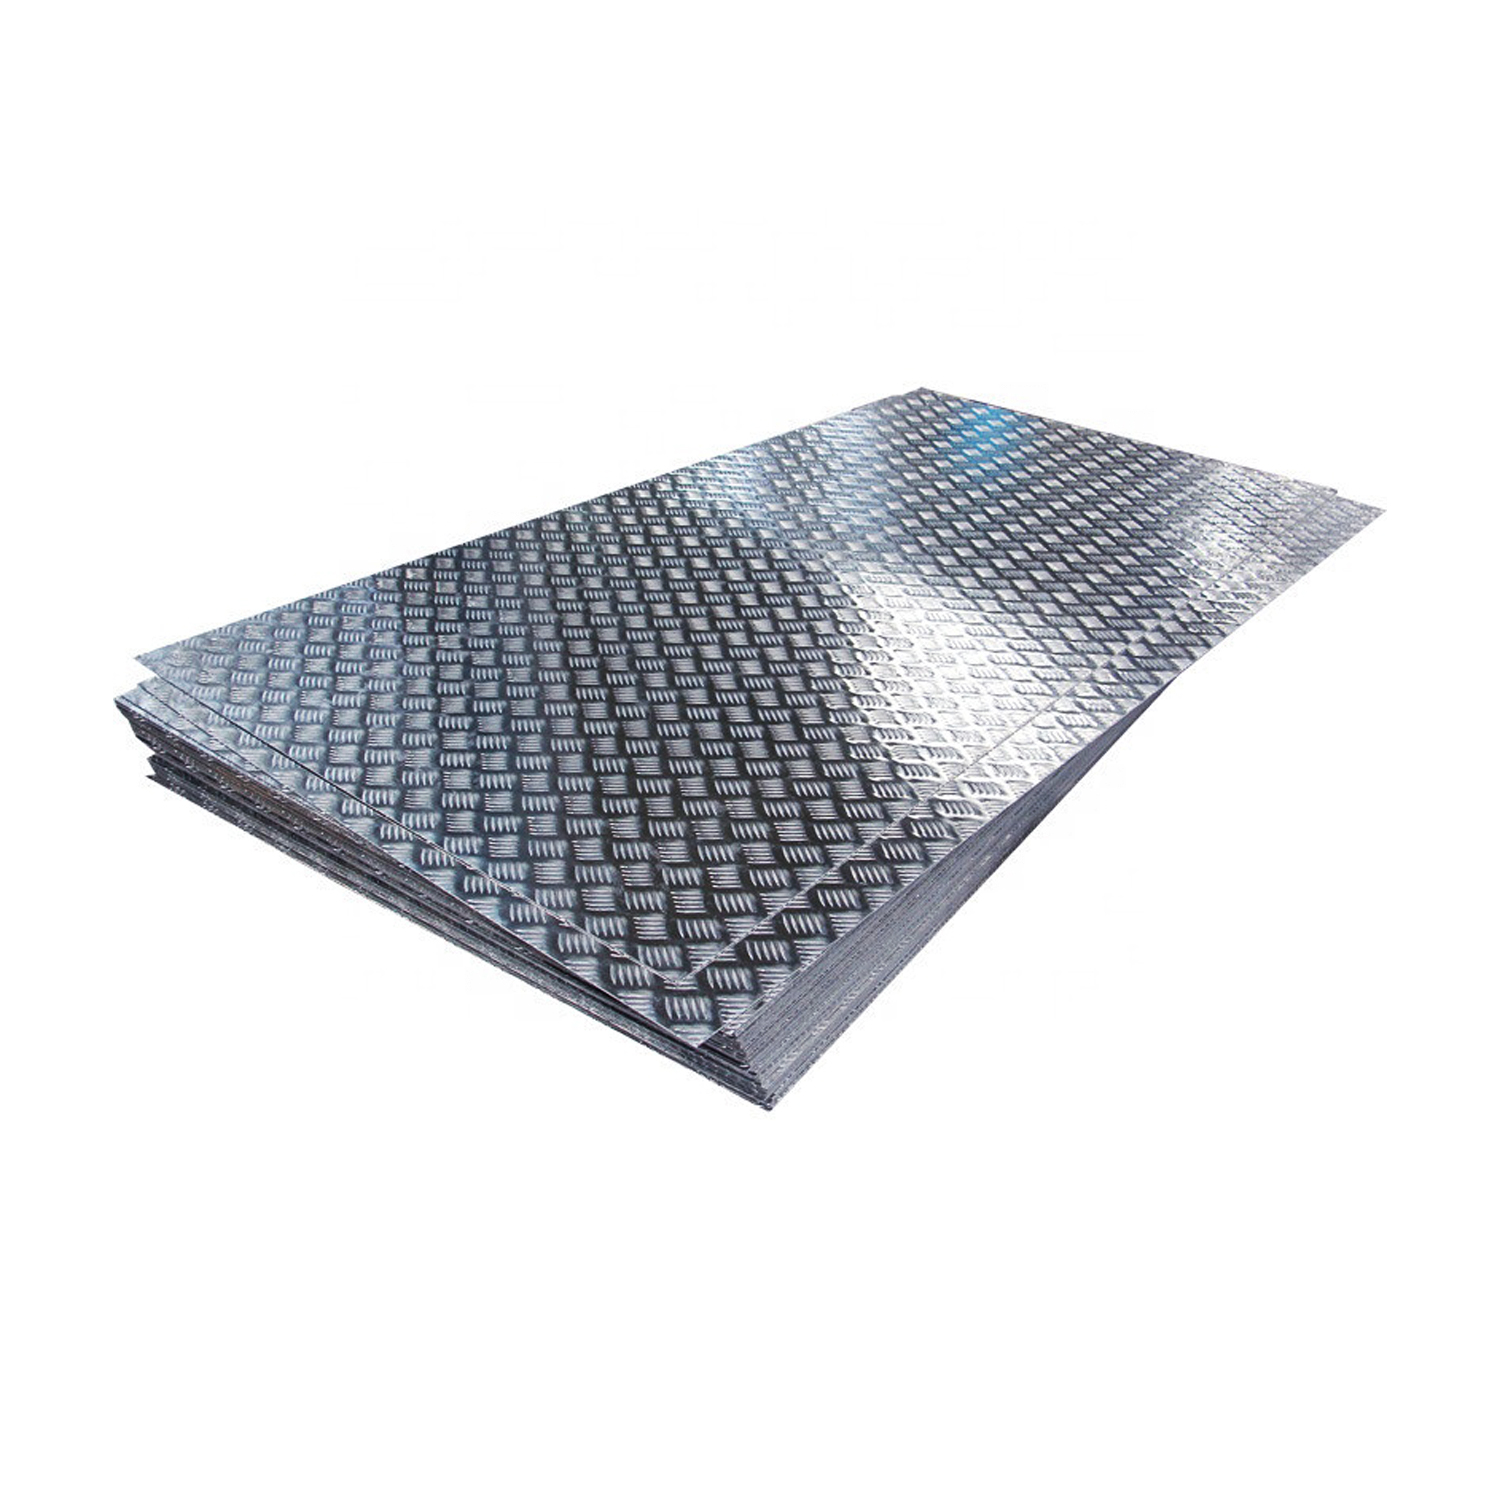 Export High Quality Cold Rolled 3mm Raised Diamond Plate A36 Carbon Steel Checked Plates Price